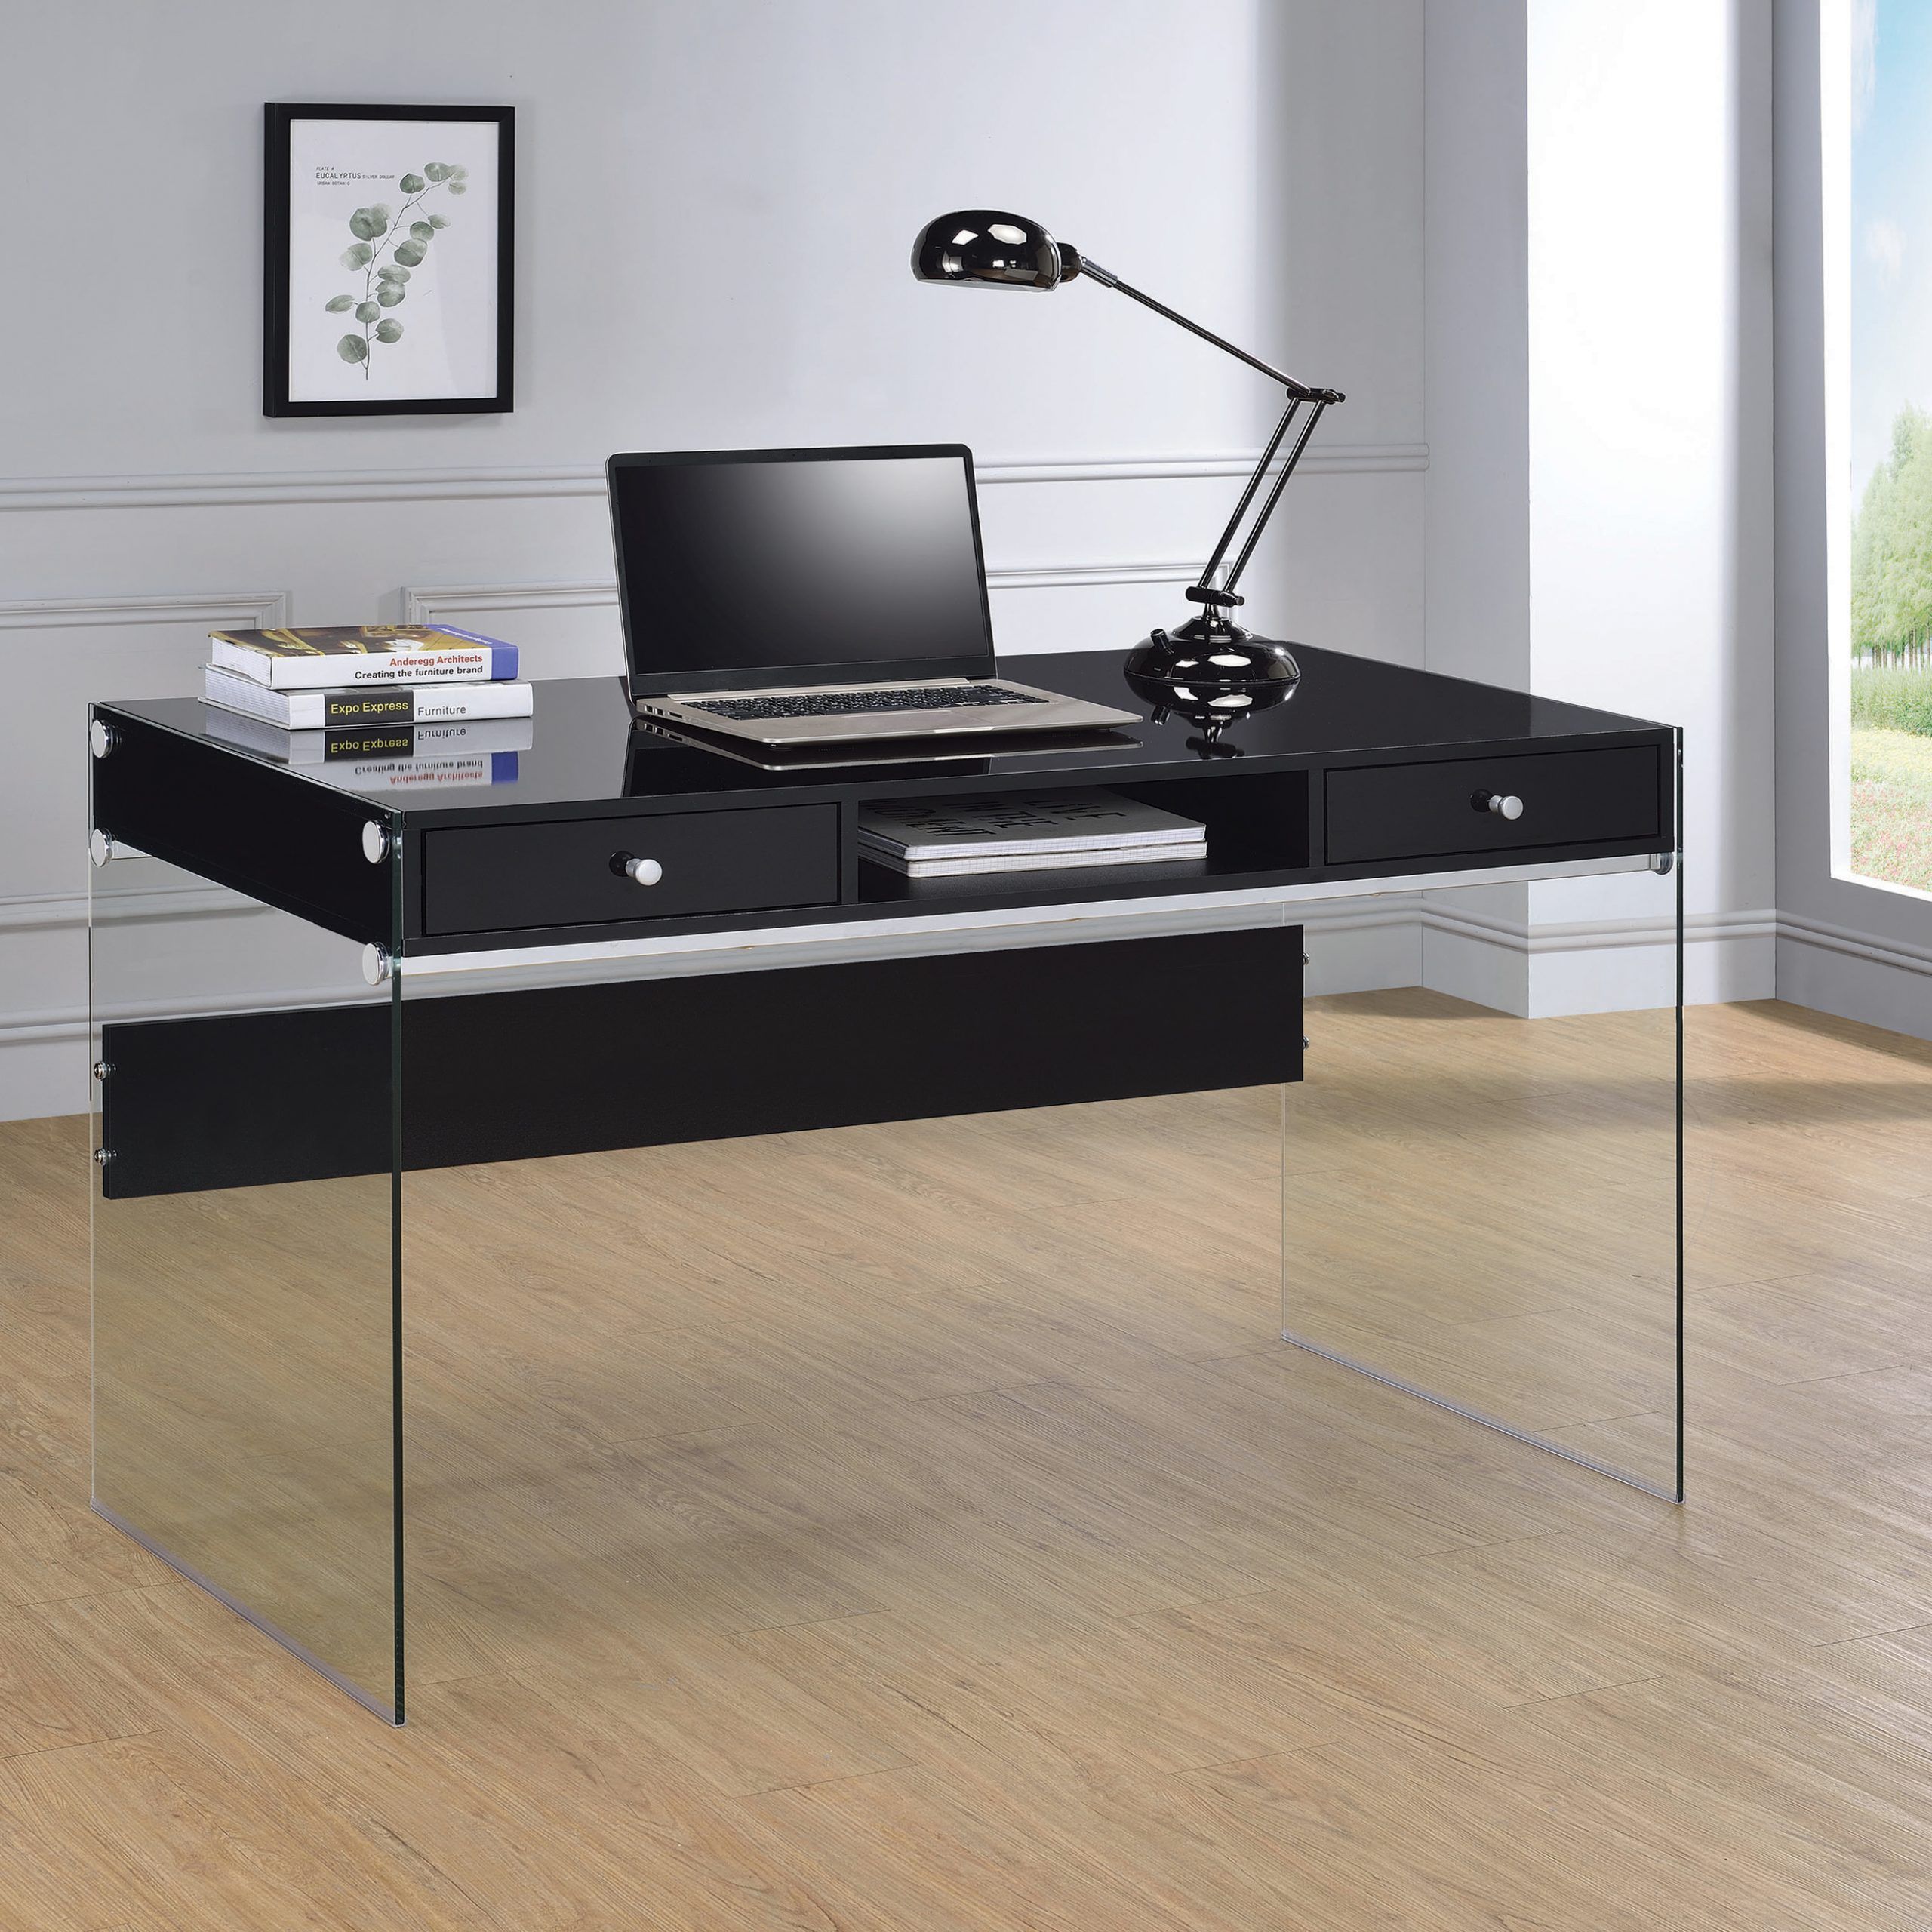 Dobrev 2 Drawer Writing Desk Glossy Black And Clear – Coaste With Black And Gray Oval Writing Desks (View 7 of 15)